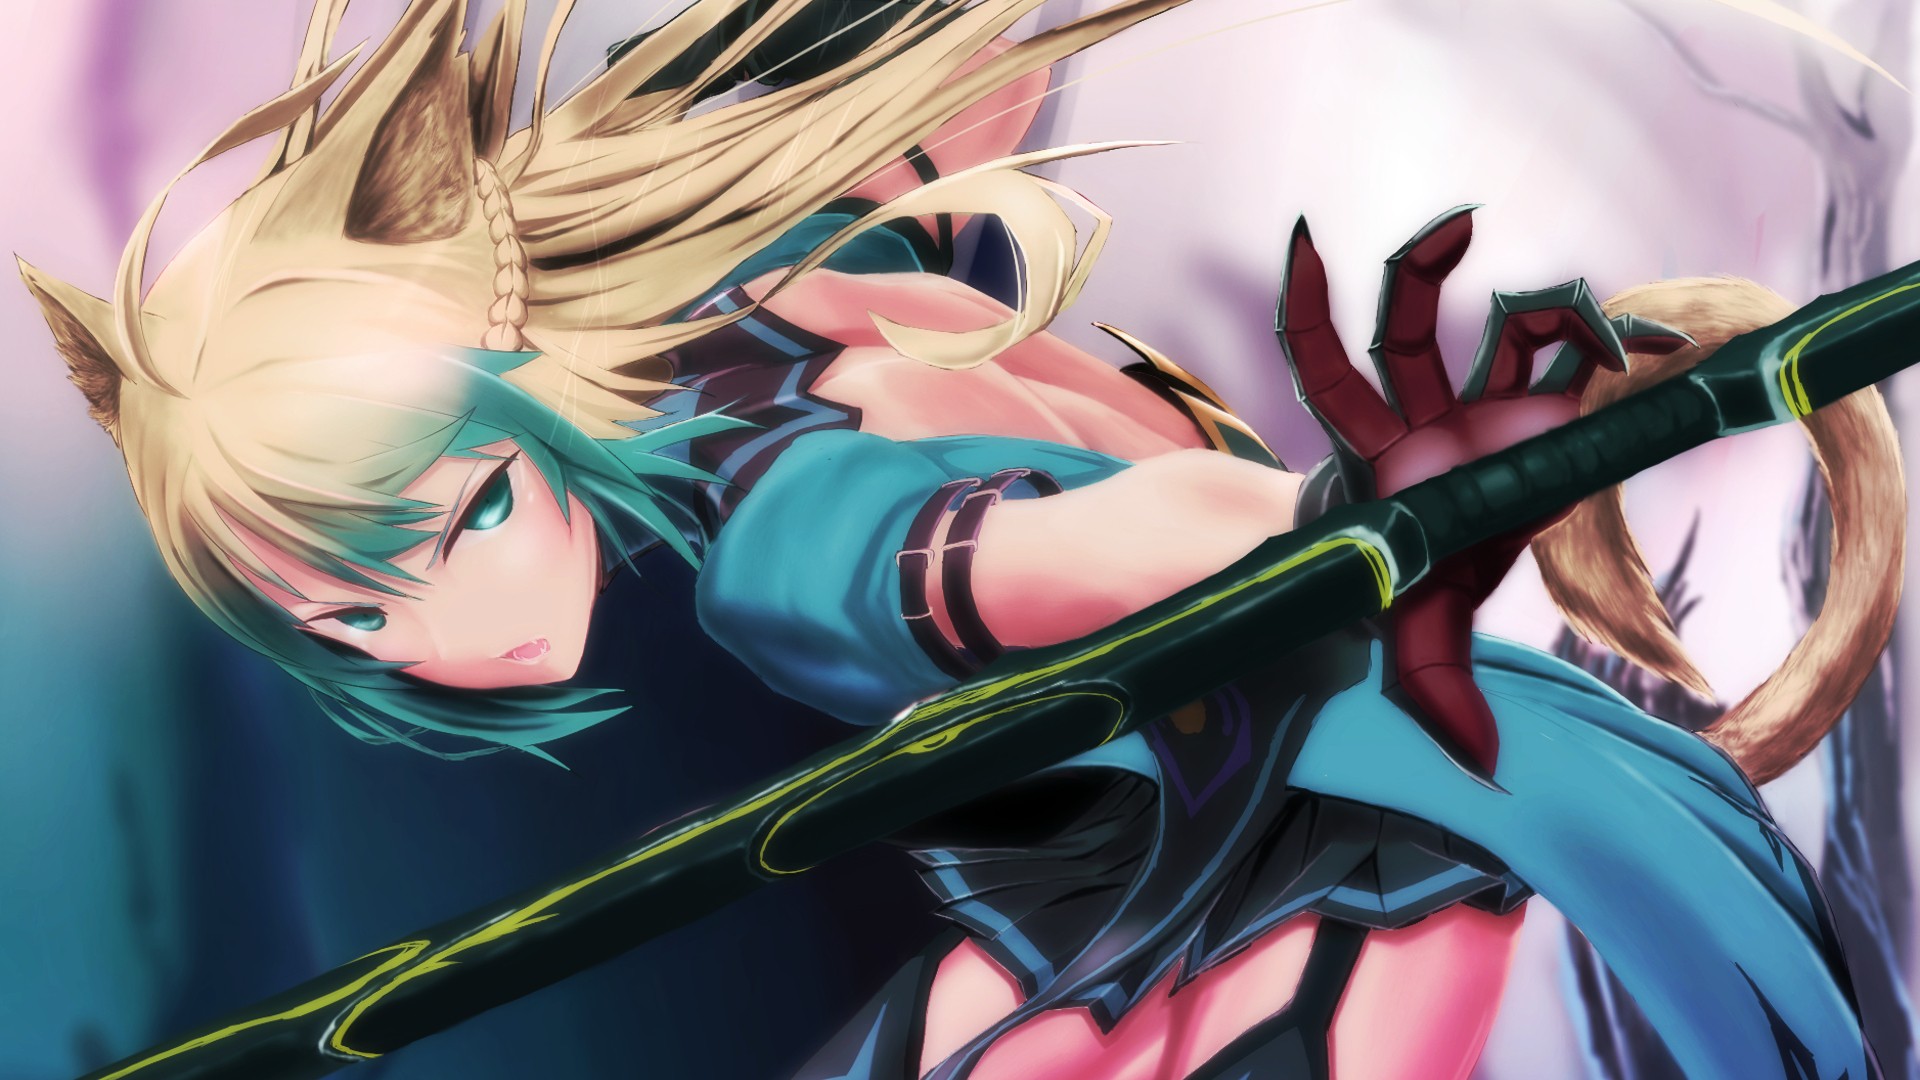 Anime Anime Girls Animal Ears Fate Apocrypha Archer Of Red Fate Series 1920x1080